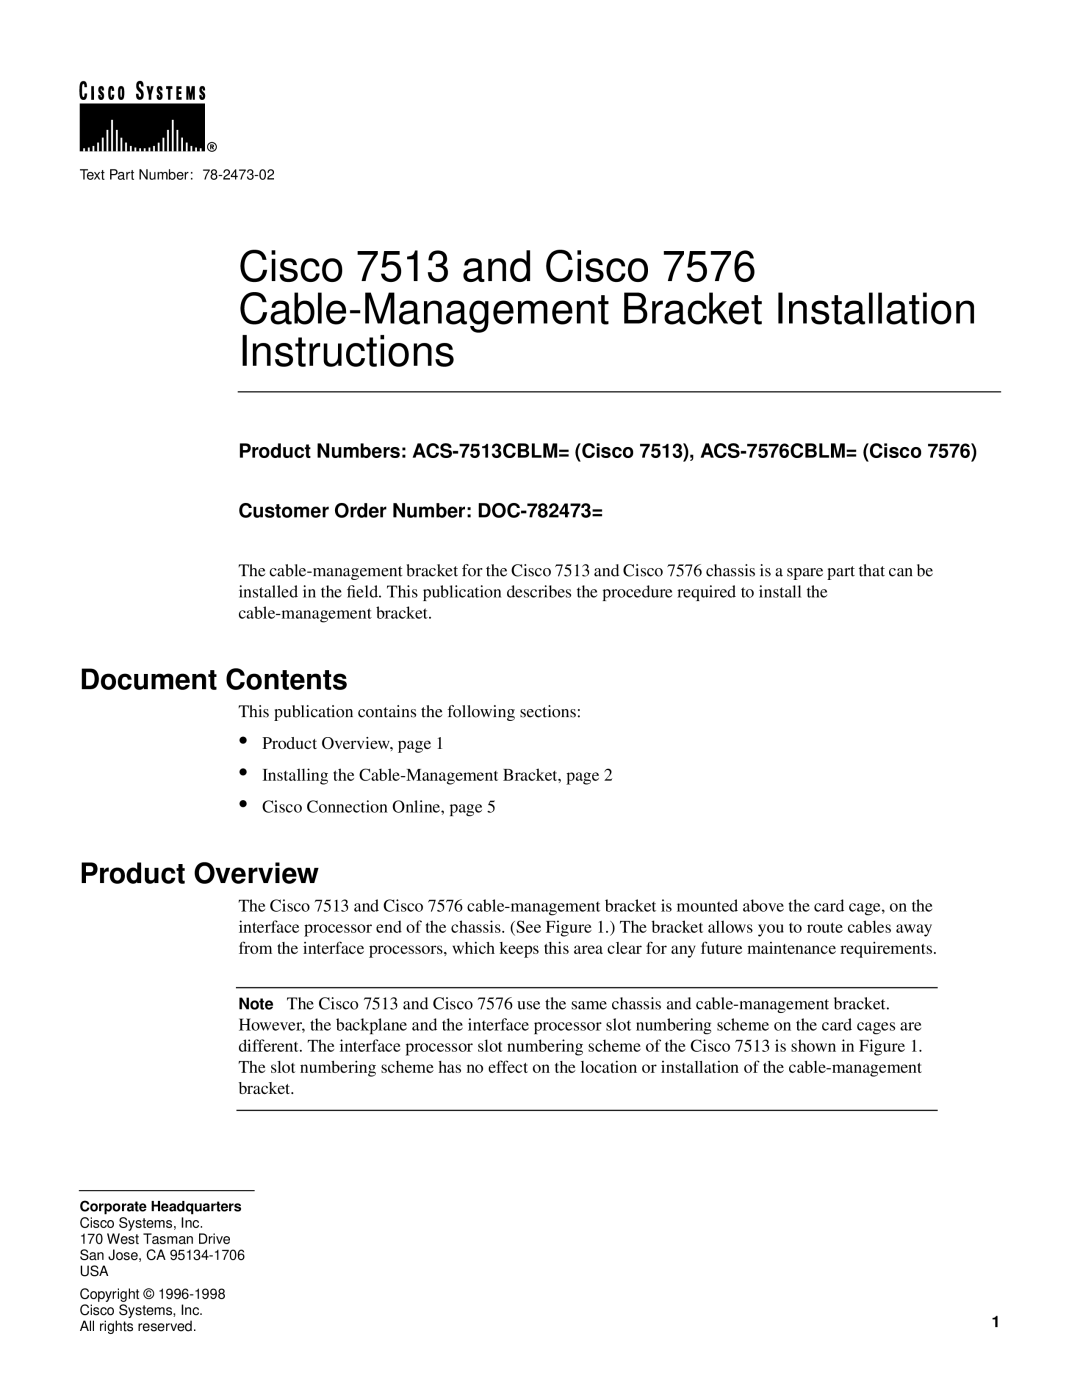 Cisco Systems Cisco 7513/7576 installation instructions Document Contents, Product Overview, Instructions 